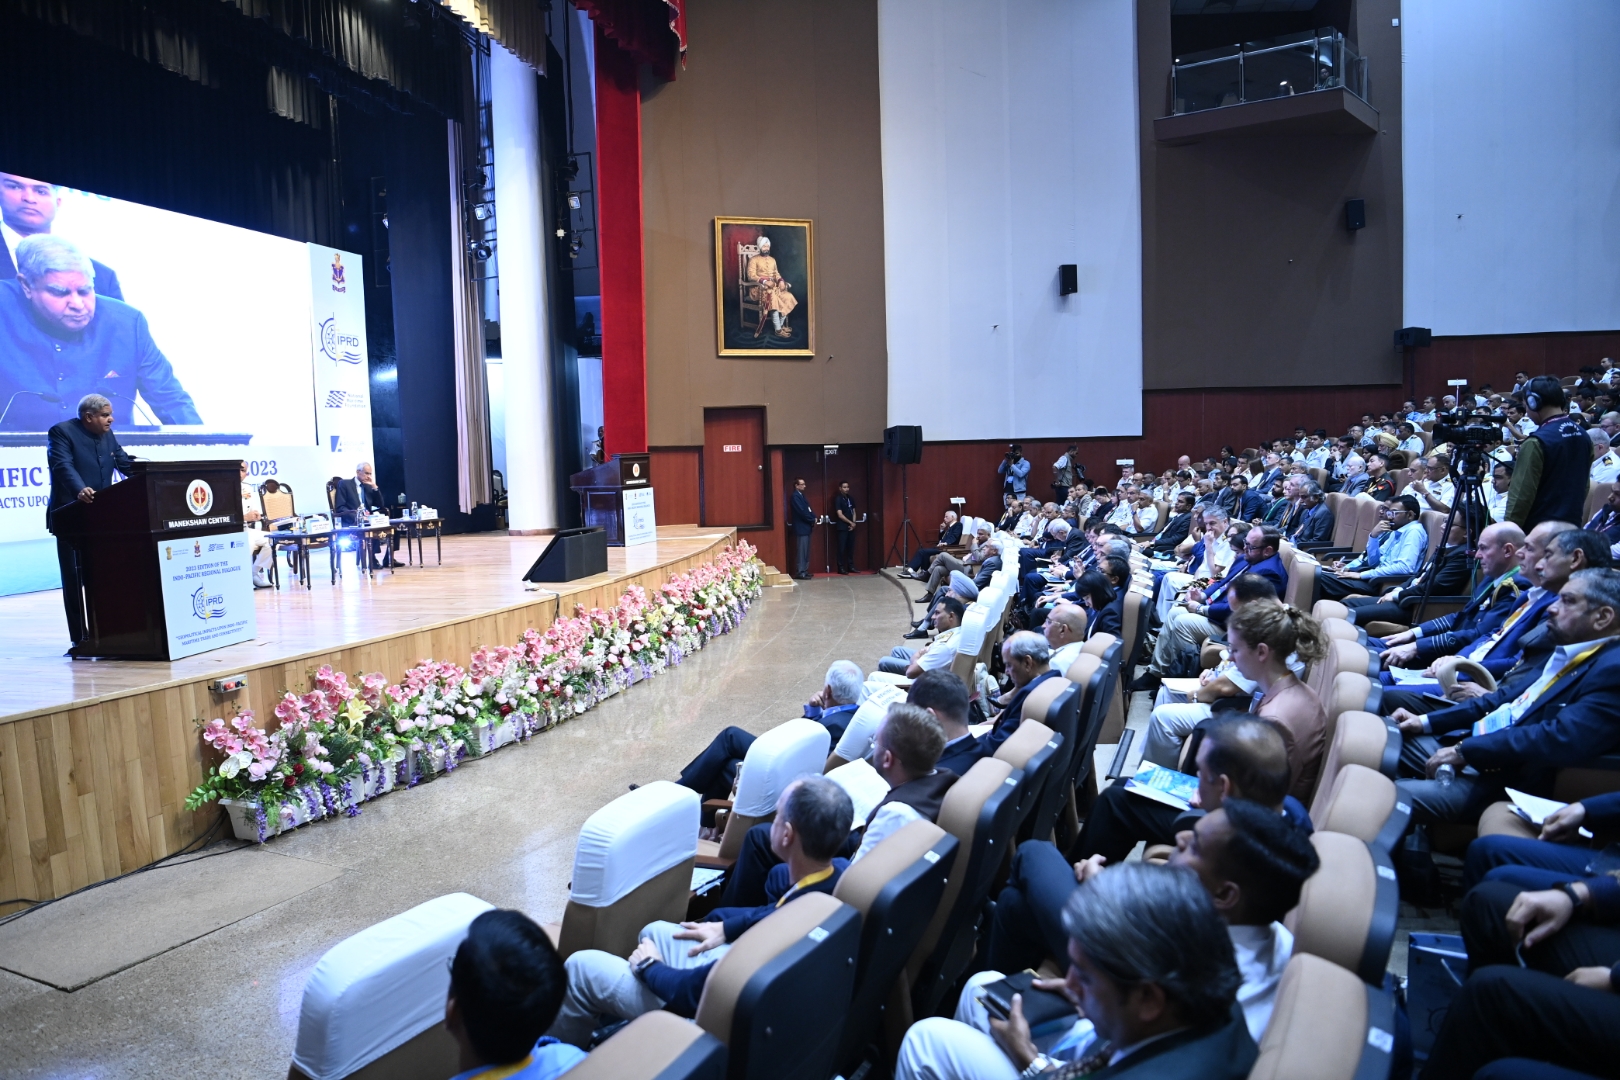 The Vice-President, Shri Jagdeep Dhankhar addressing the gathering at the 2023 edition of the “Indo-Pacific Regional Dialogue” at Zorawar Auditorium, Manekshaw Centre in New Delhi on November 15, 2023.